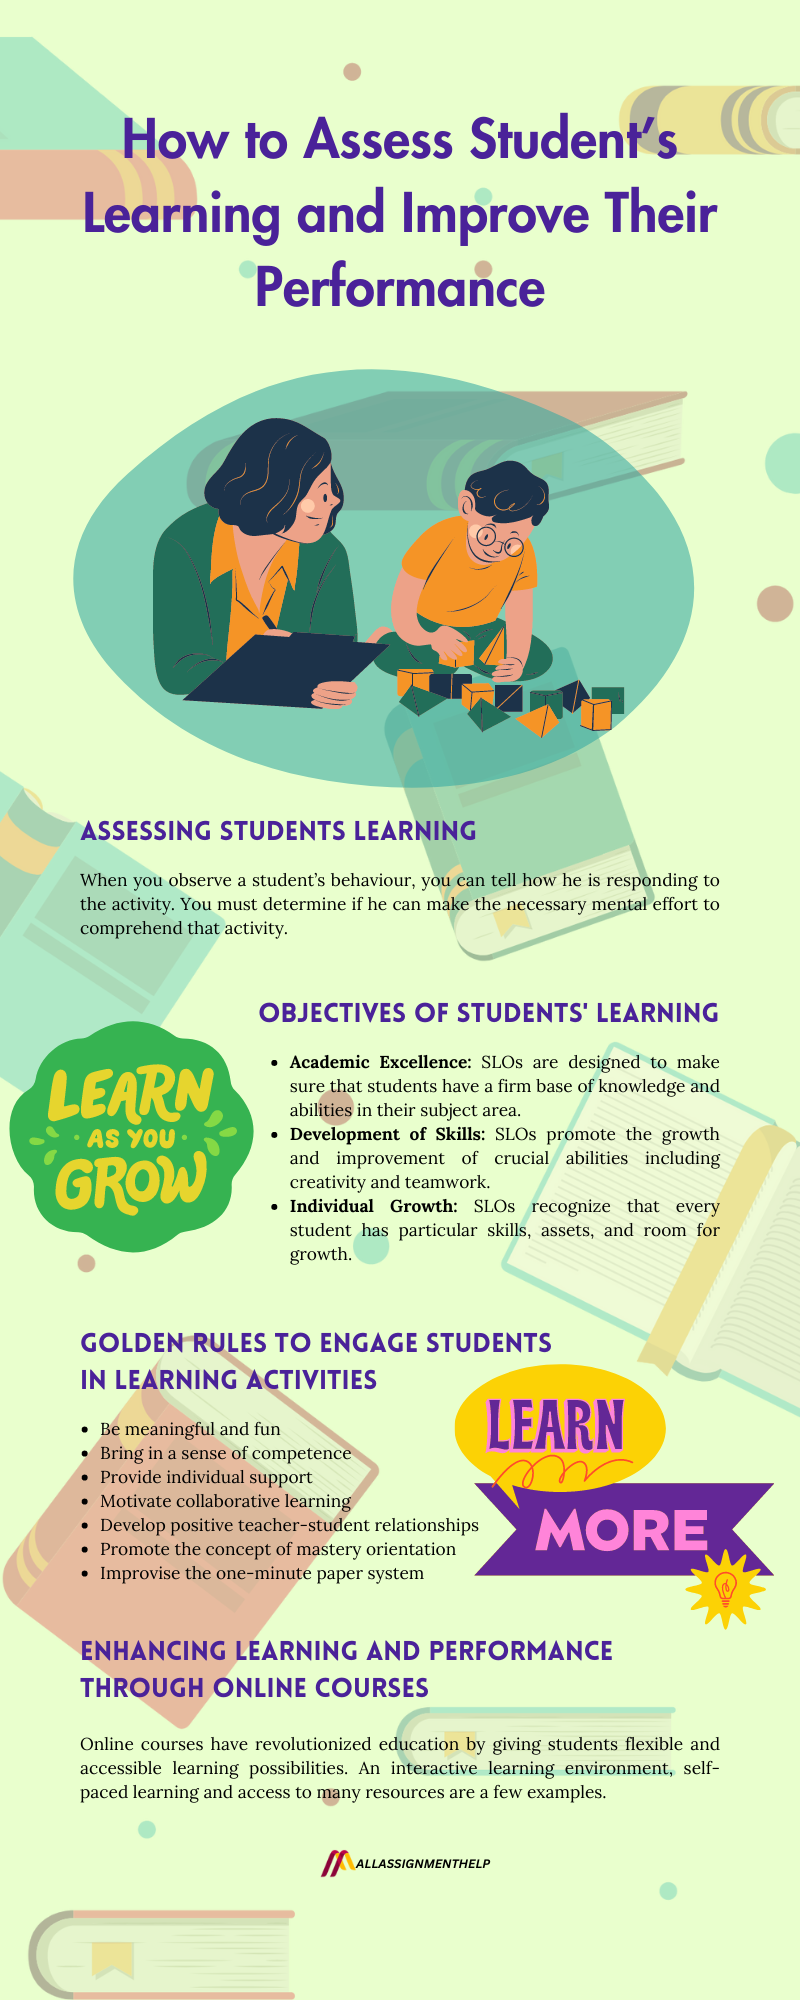 How-to-Assess-Students-Learning-and-Improve-Their-Performance-2.png
